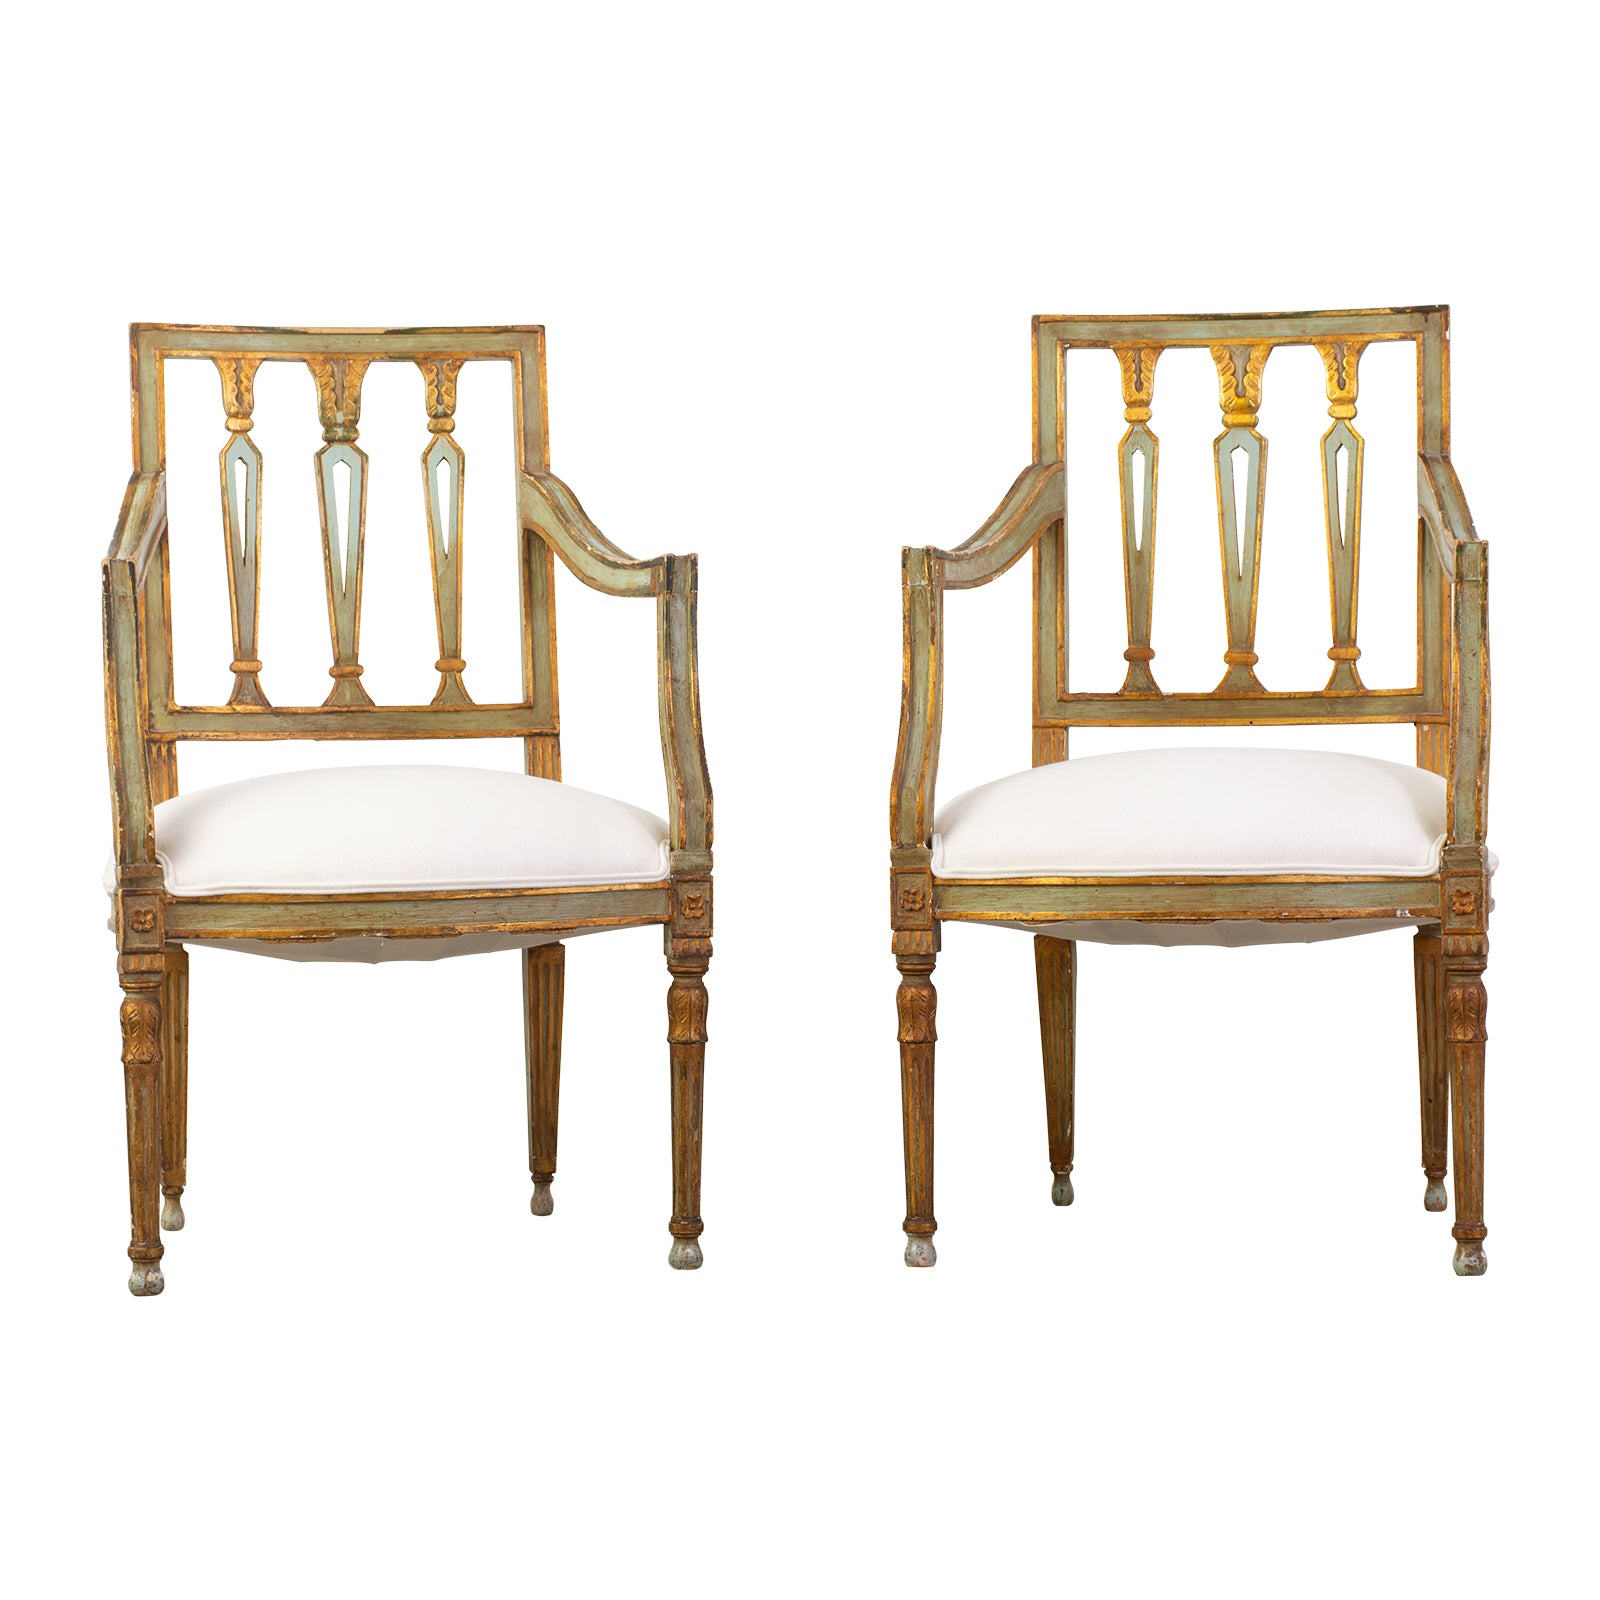 Pair of 19th Century Italian Green and Gilt Armchairs made in the Neo-Classic Taste